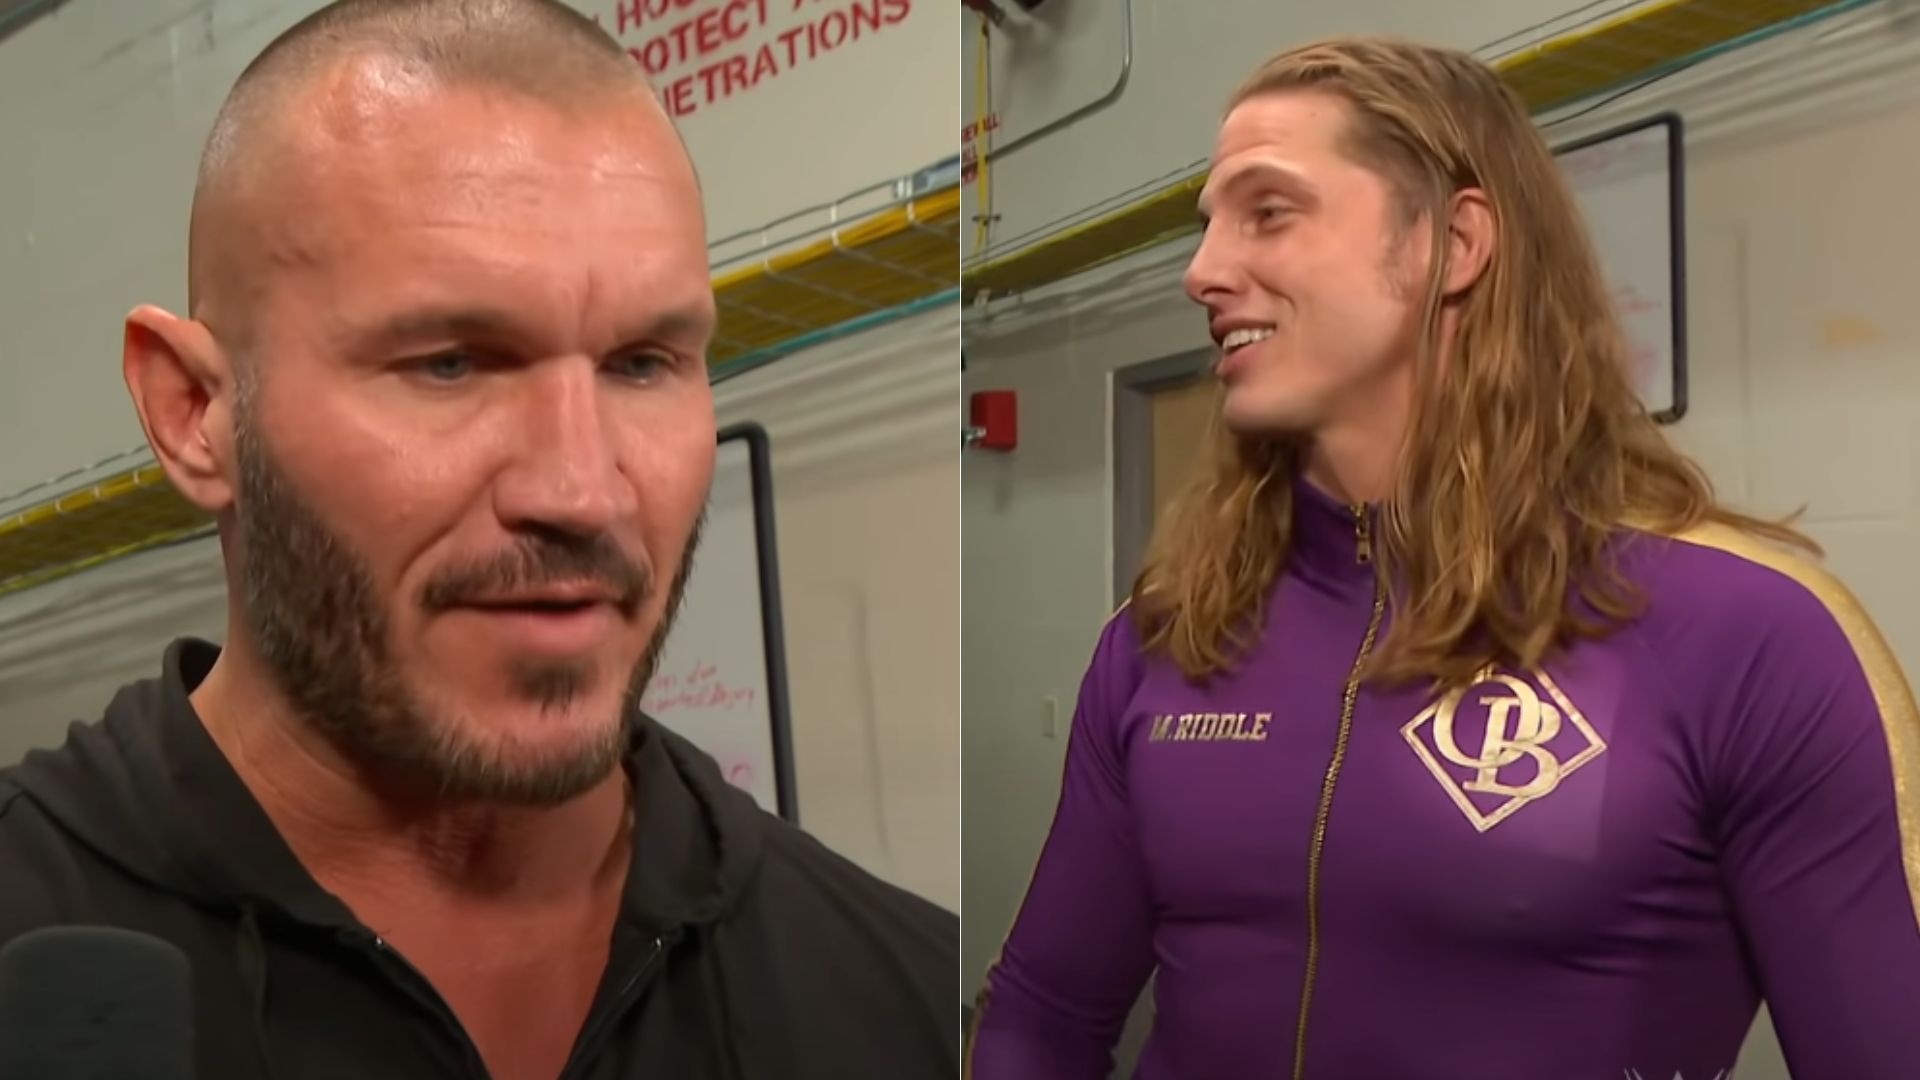 Randy Orton (left) and Matt Riddle (right) are known as RK-Bro.